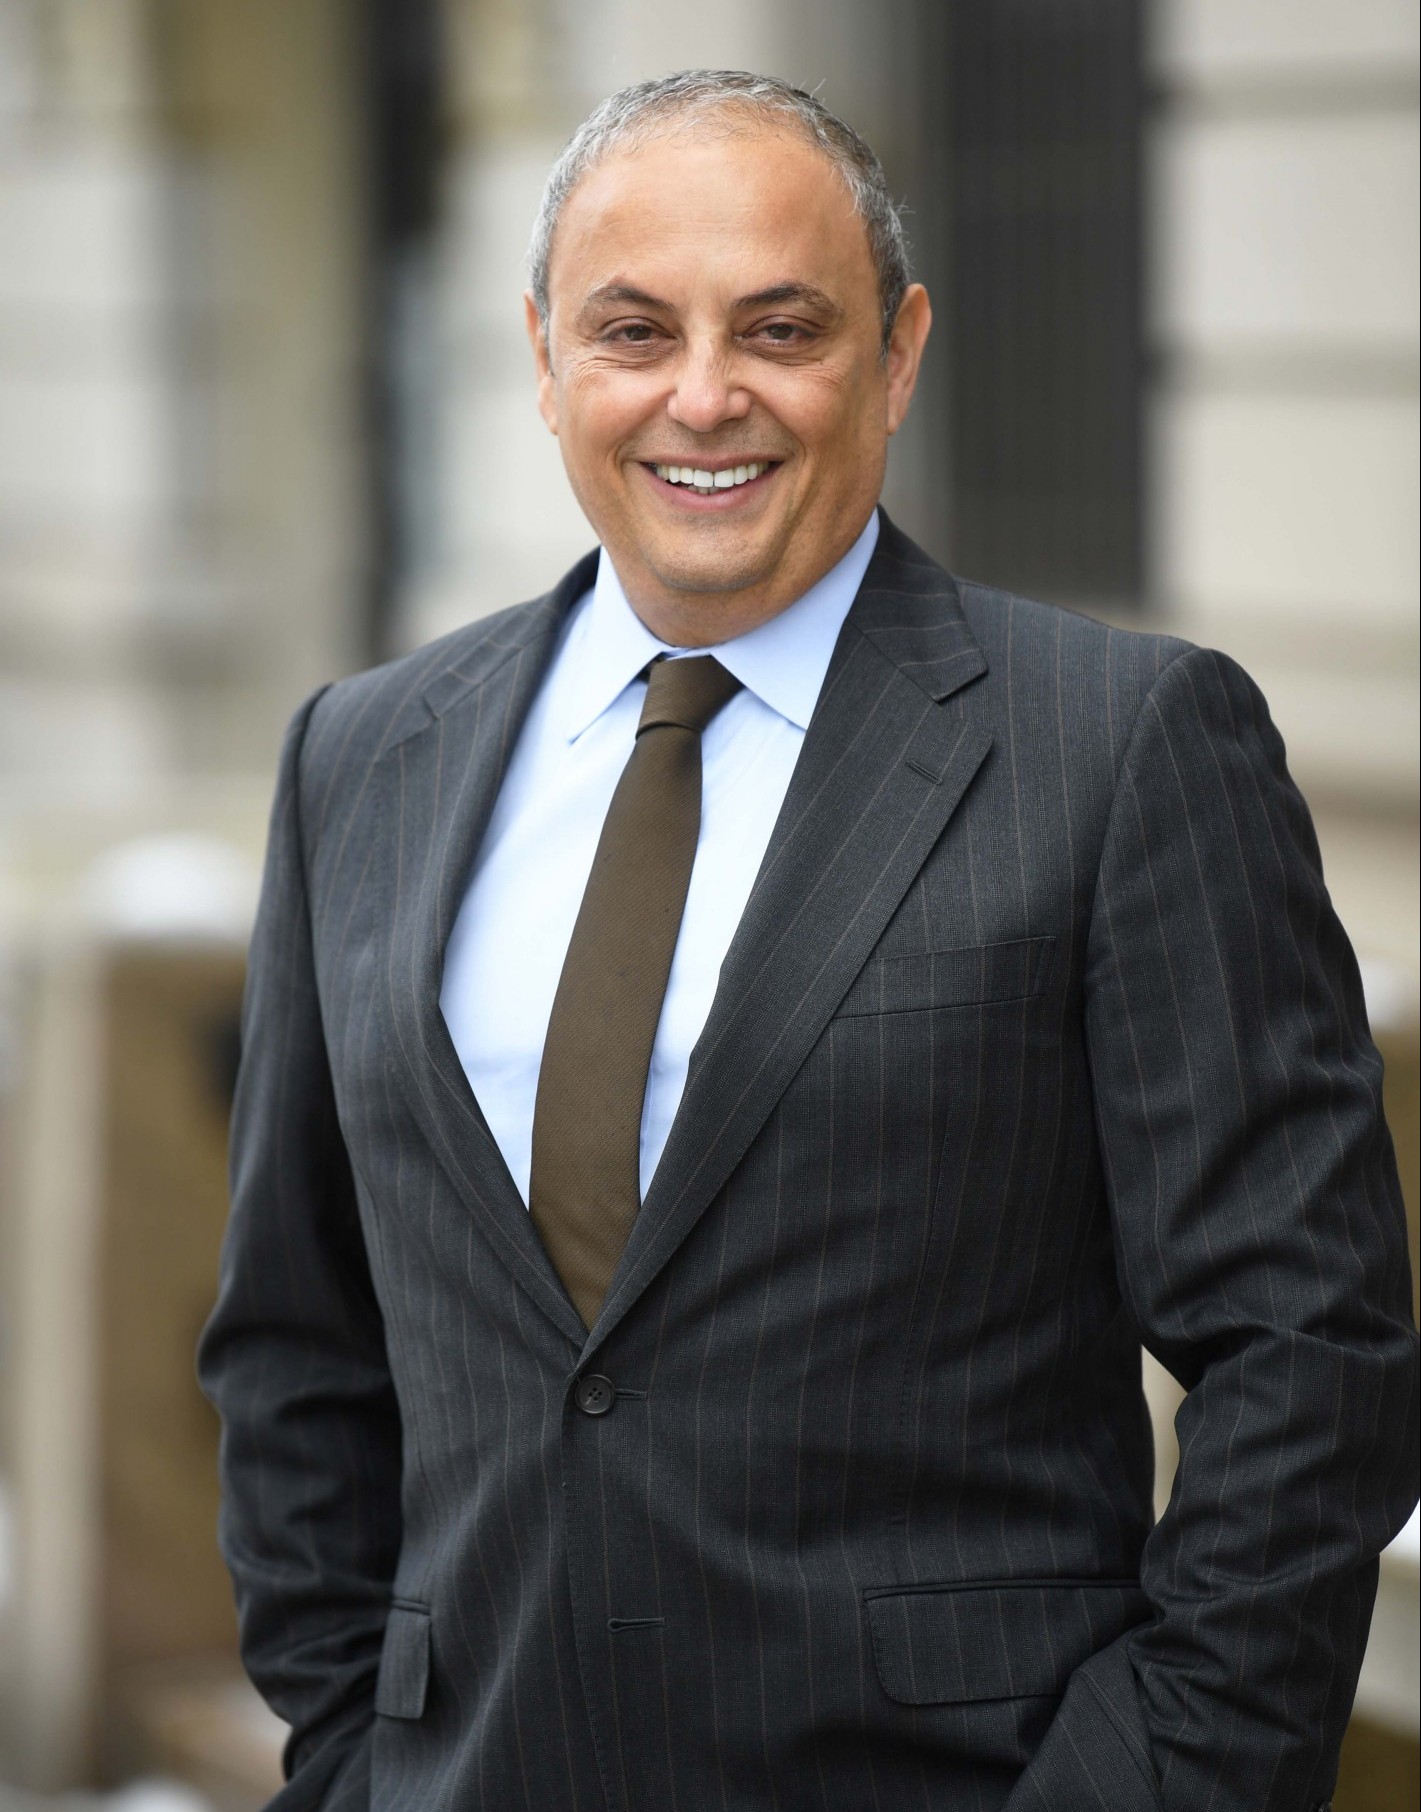 Safwan M. Masri, Executive Vice President for Global Centers and Global Development